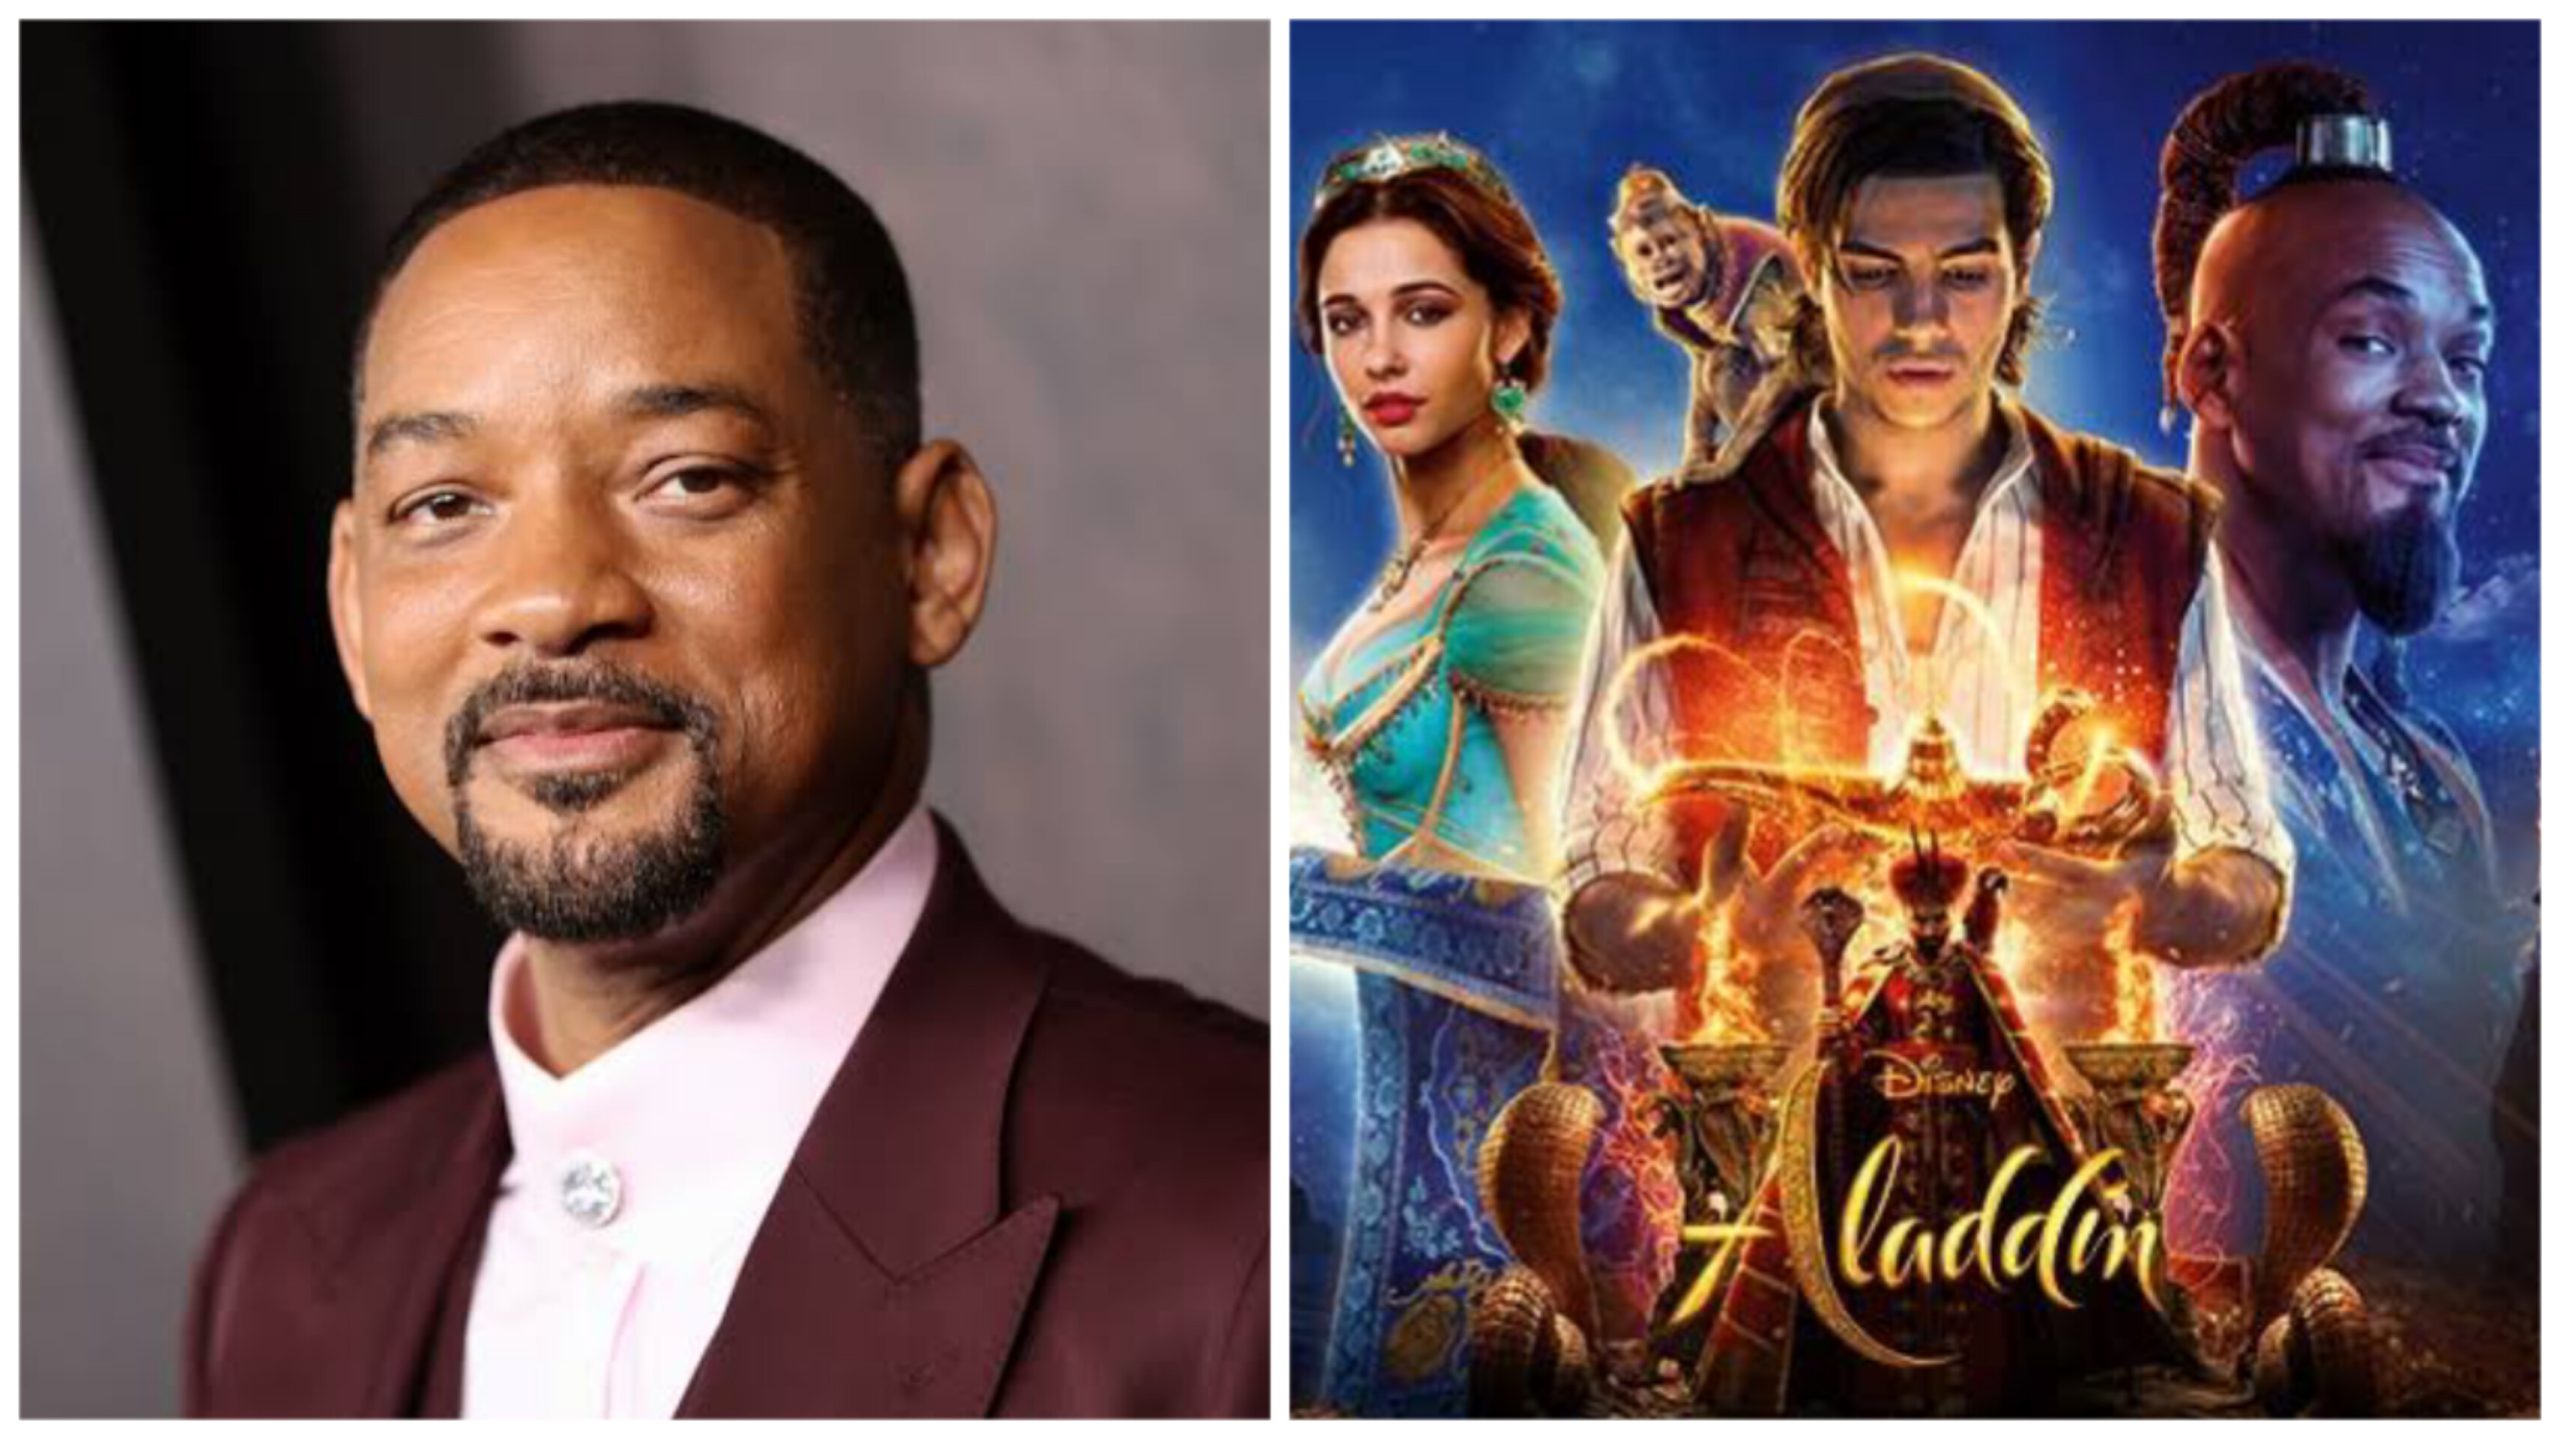 According to sources, Will Smith is scheduled to start filming for the sequel of Aladdin, which is set to release next year.